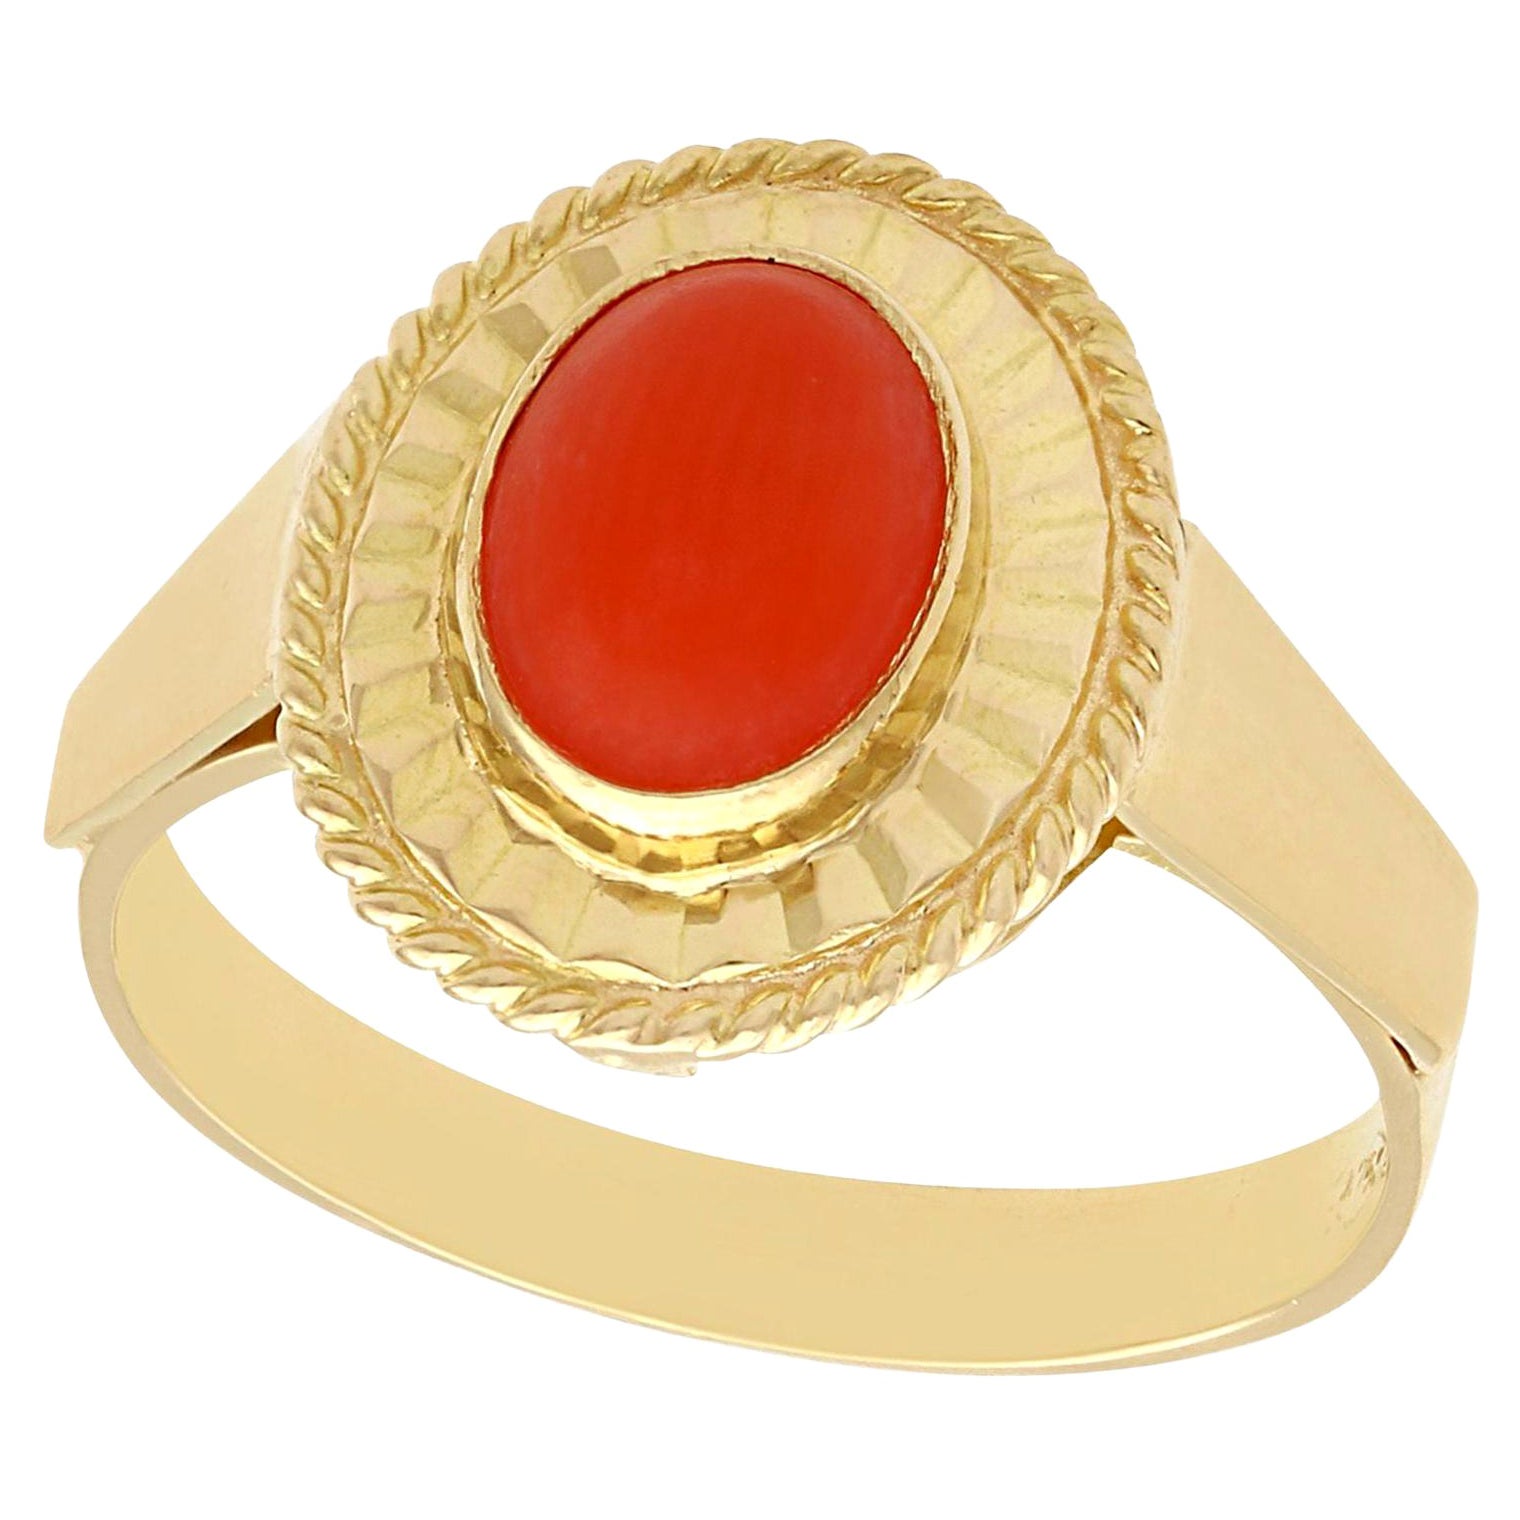 SIDHGEMS 11.25 Ratti 10.25 Crt Natural Red Coral Moonga Ring Astrology  Gemstone Brass Coral Gold Plated Ring Price in India - Buy SIDHGEMS 11.25  Ratti 10.25 Crt Natural Red Coral Moonga Ring